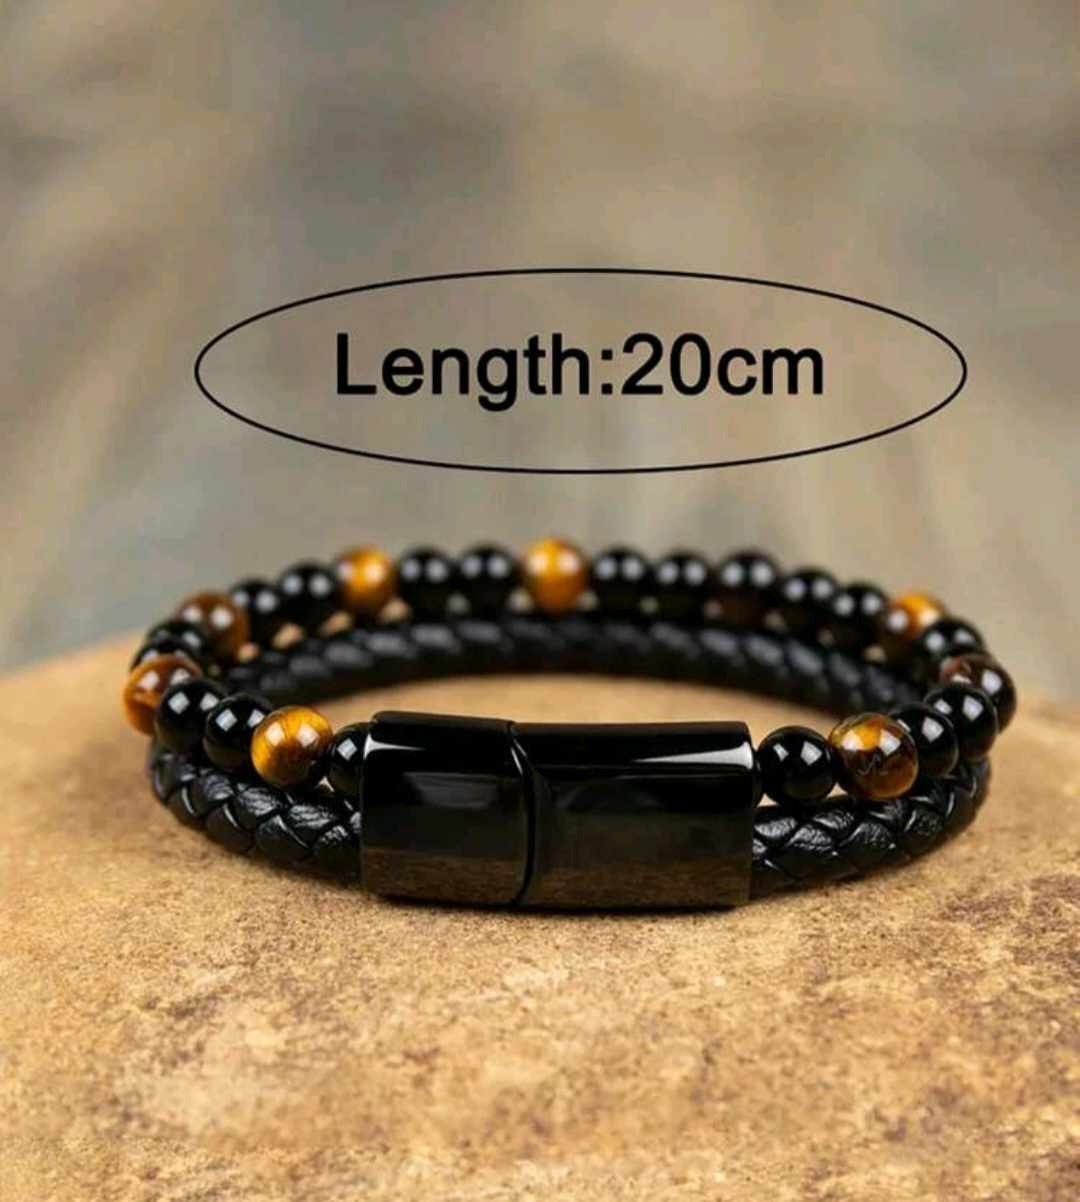 MEN'S POWER AND PROTECTION BRACELET